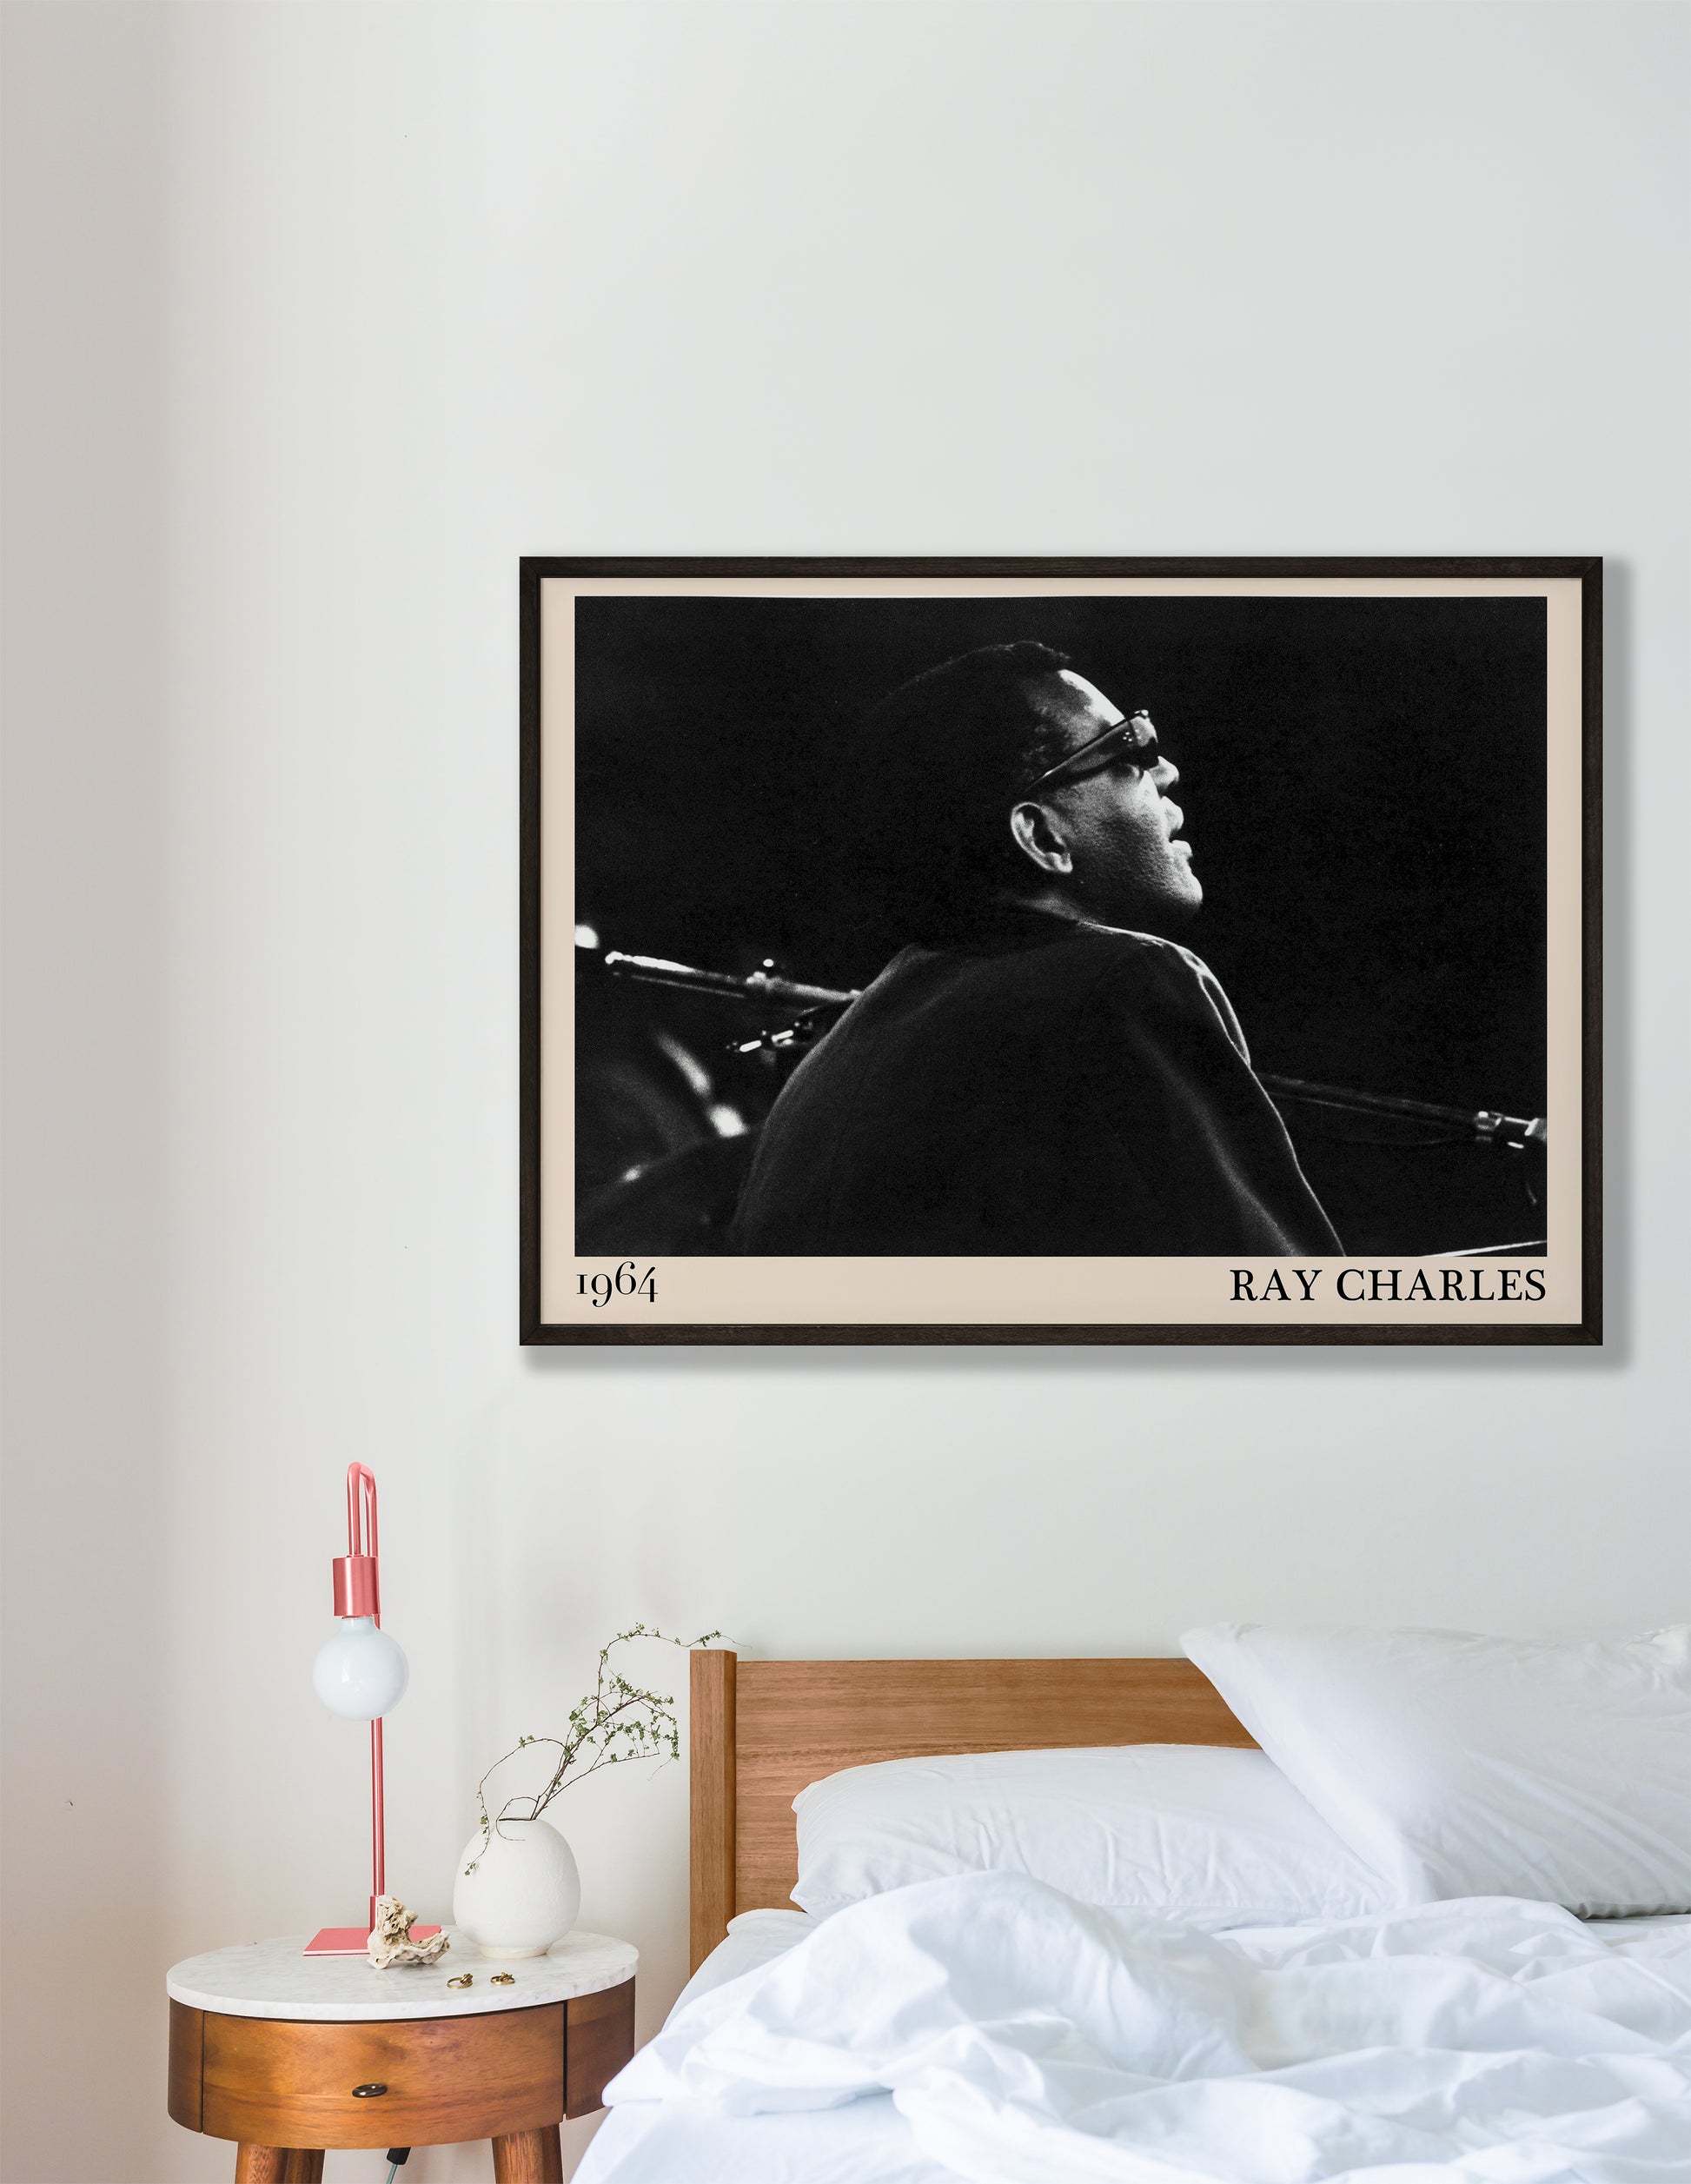  1964 photograph of blues legend Ray Charles, transformed into a retro black-framed poster hanging on a white bedroom room wall